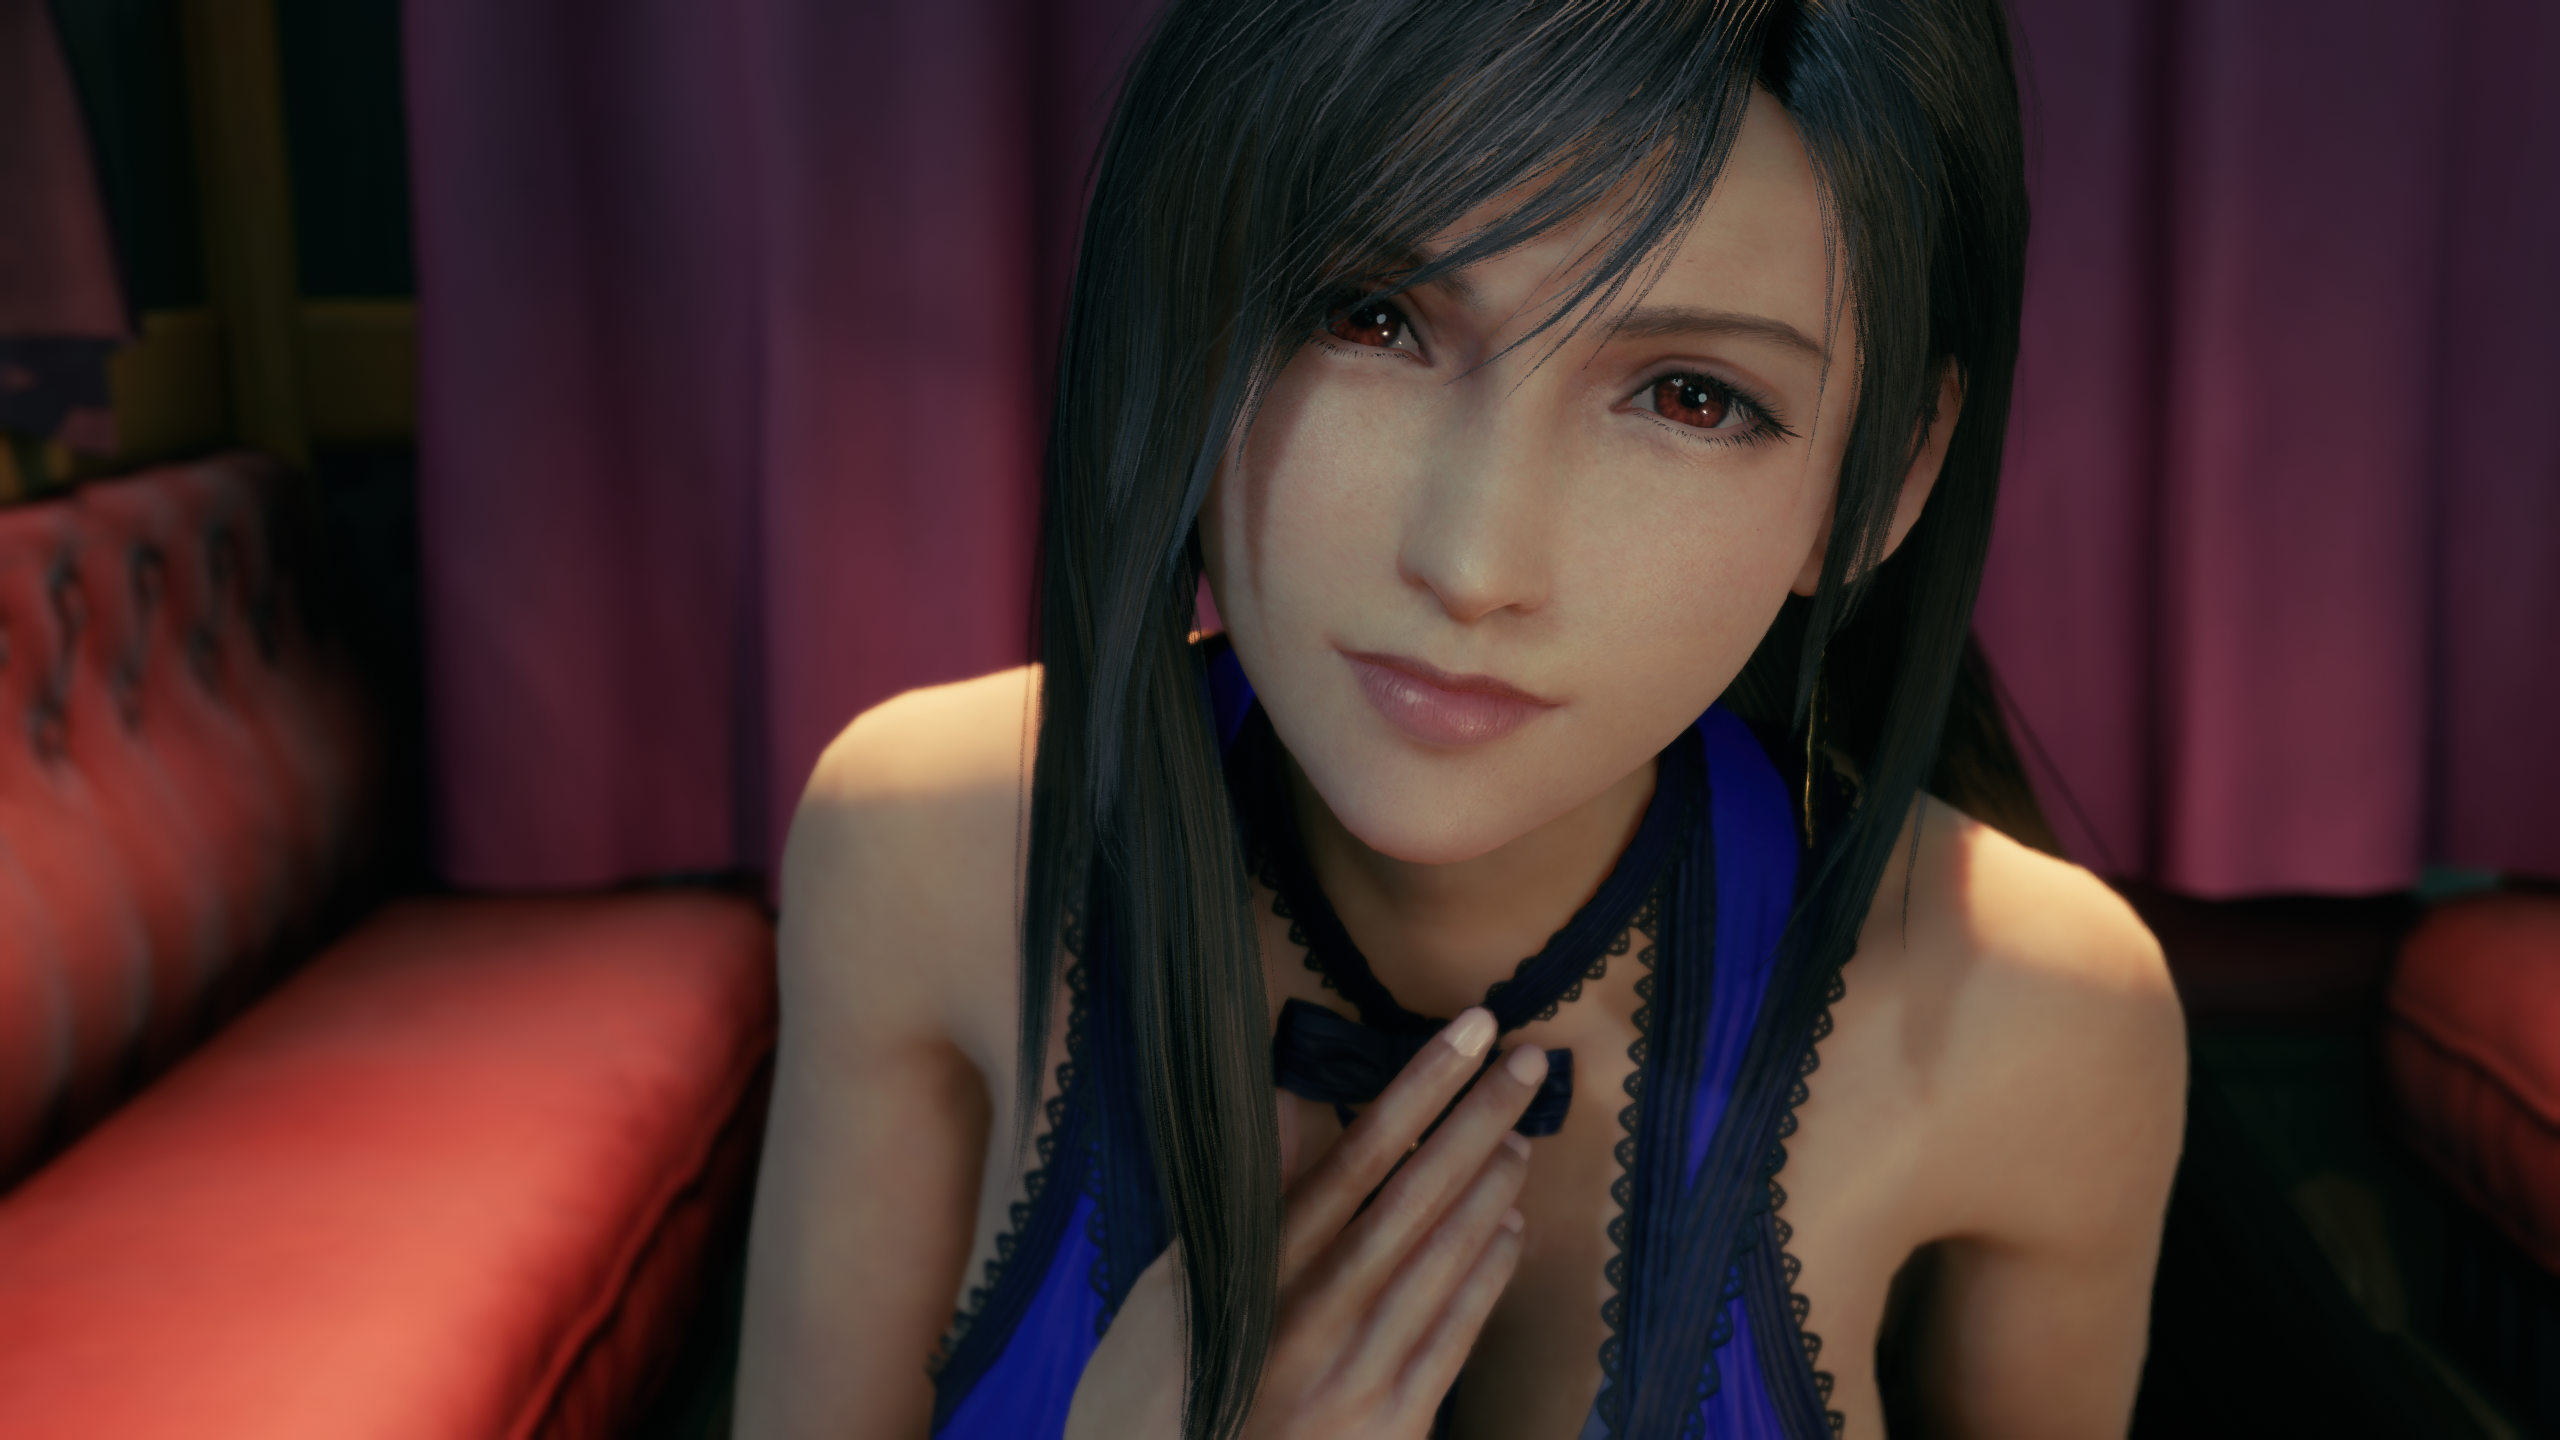 Final Fantasy Vii Remake Video Games Video Game Characters Tifa Lockhart CGi Video Game Girls Face L 2560x1440